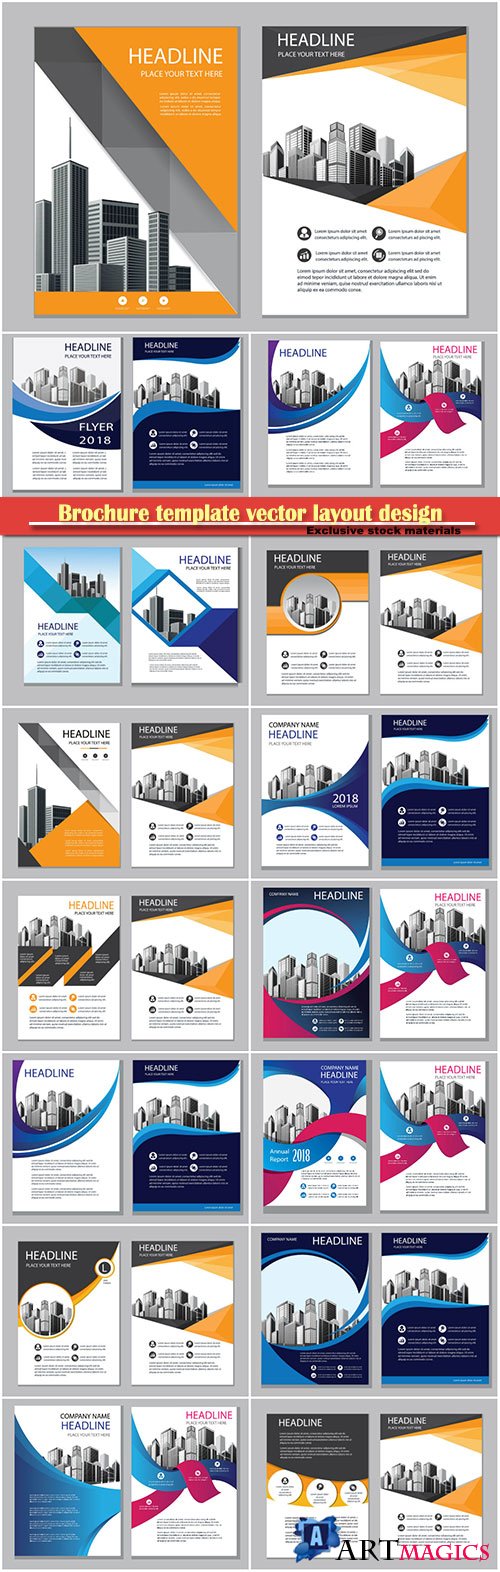 Brochure template vector layout design, corporate business annual report, magazine, flyer mockup # 143